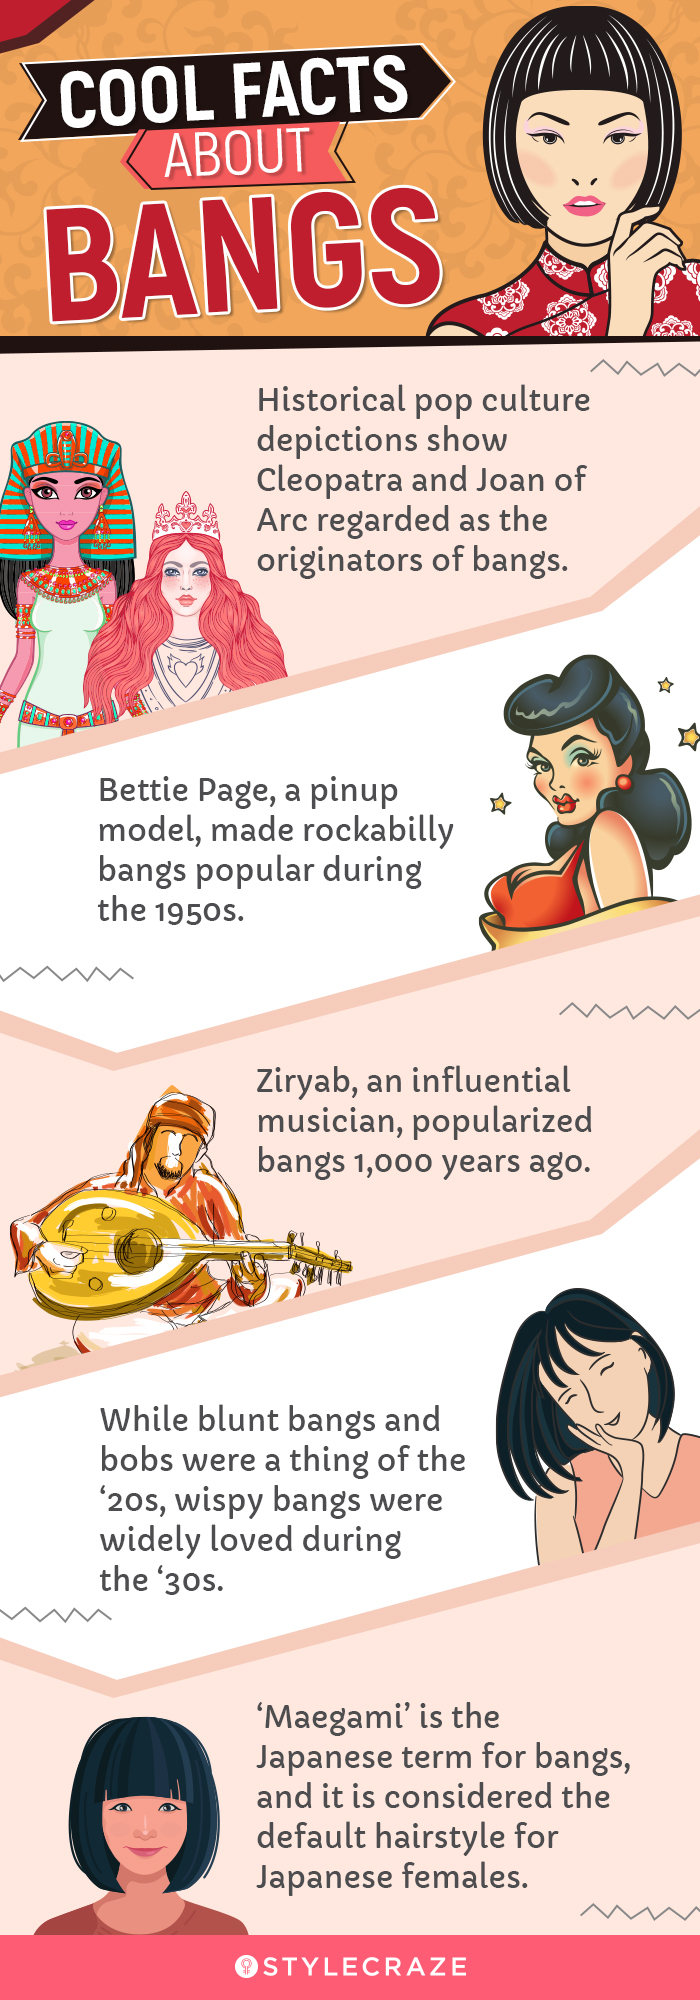 cool facts about bangs (infographic)